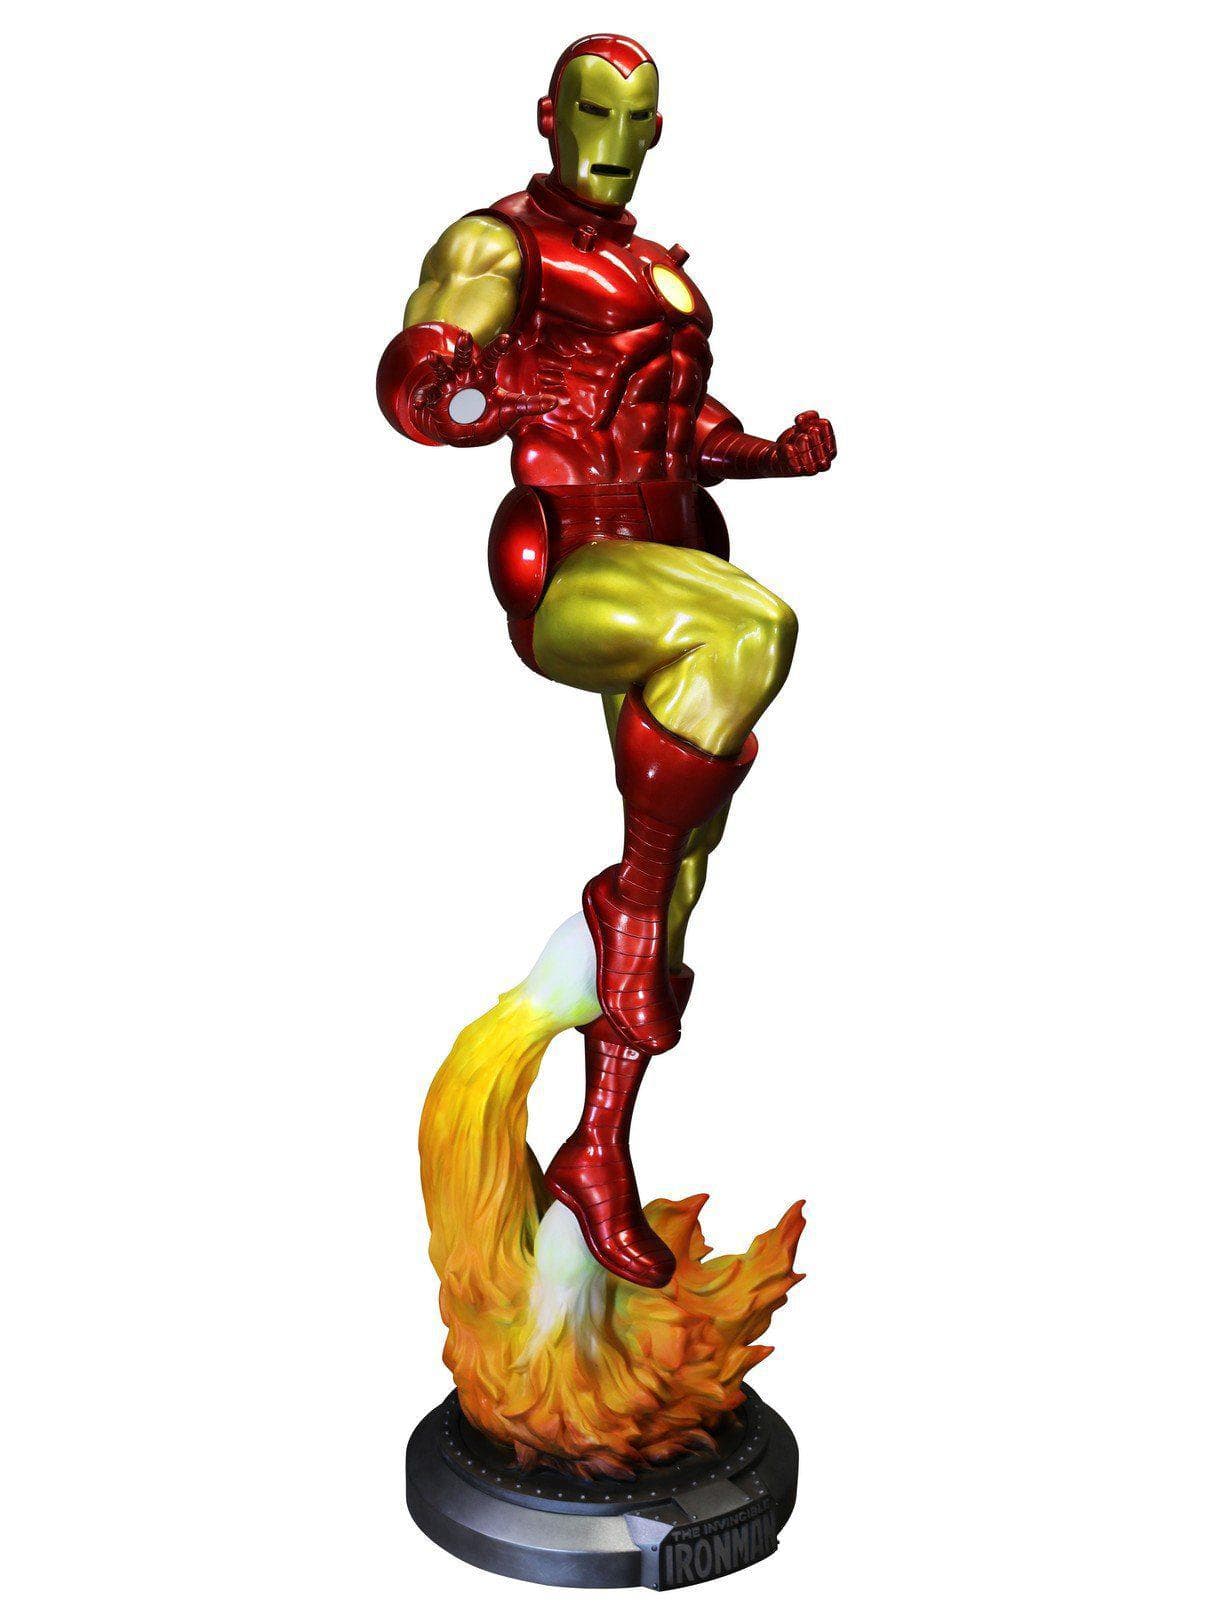 Life-size Marvel Universe Iron Man Statue - Collectible - costumes.com